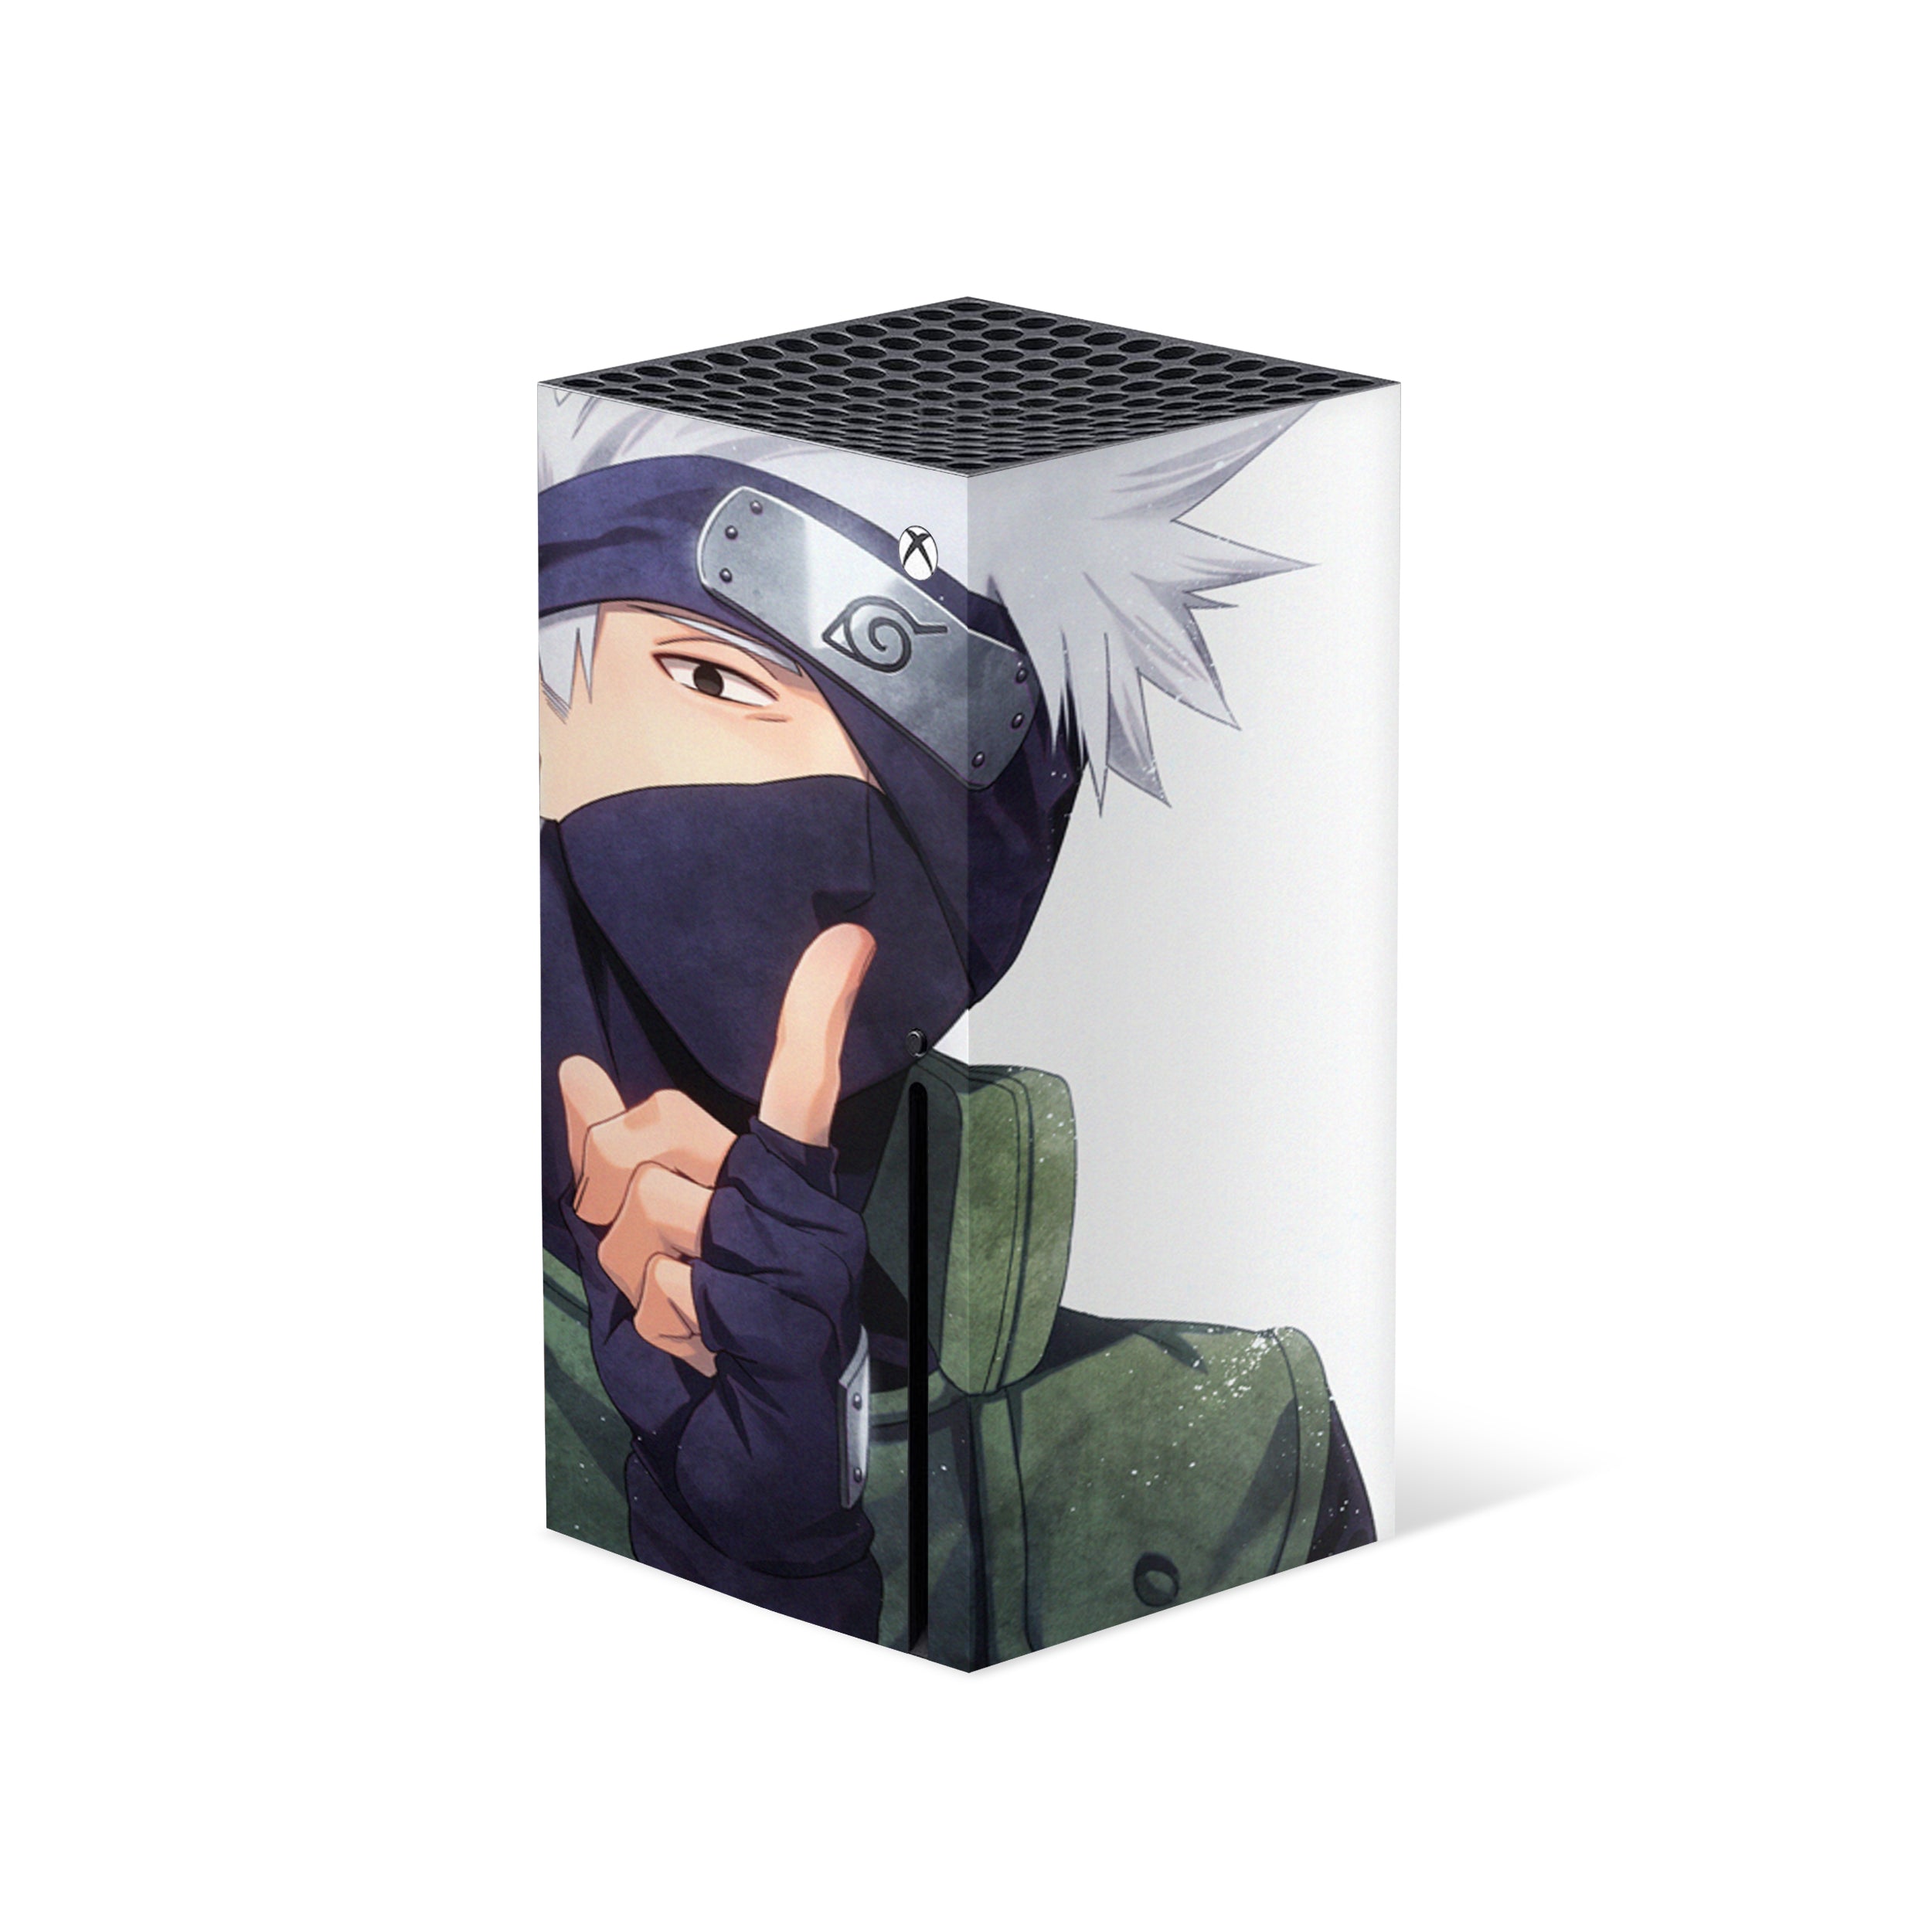 A video game skin featuring a Naruto Kakashi design for the Xbox Series X.